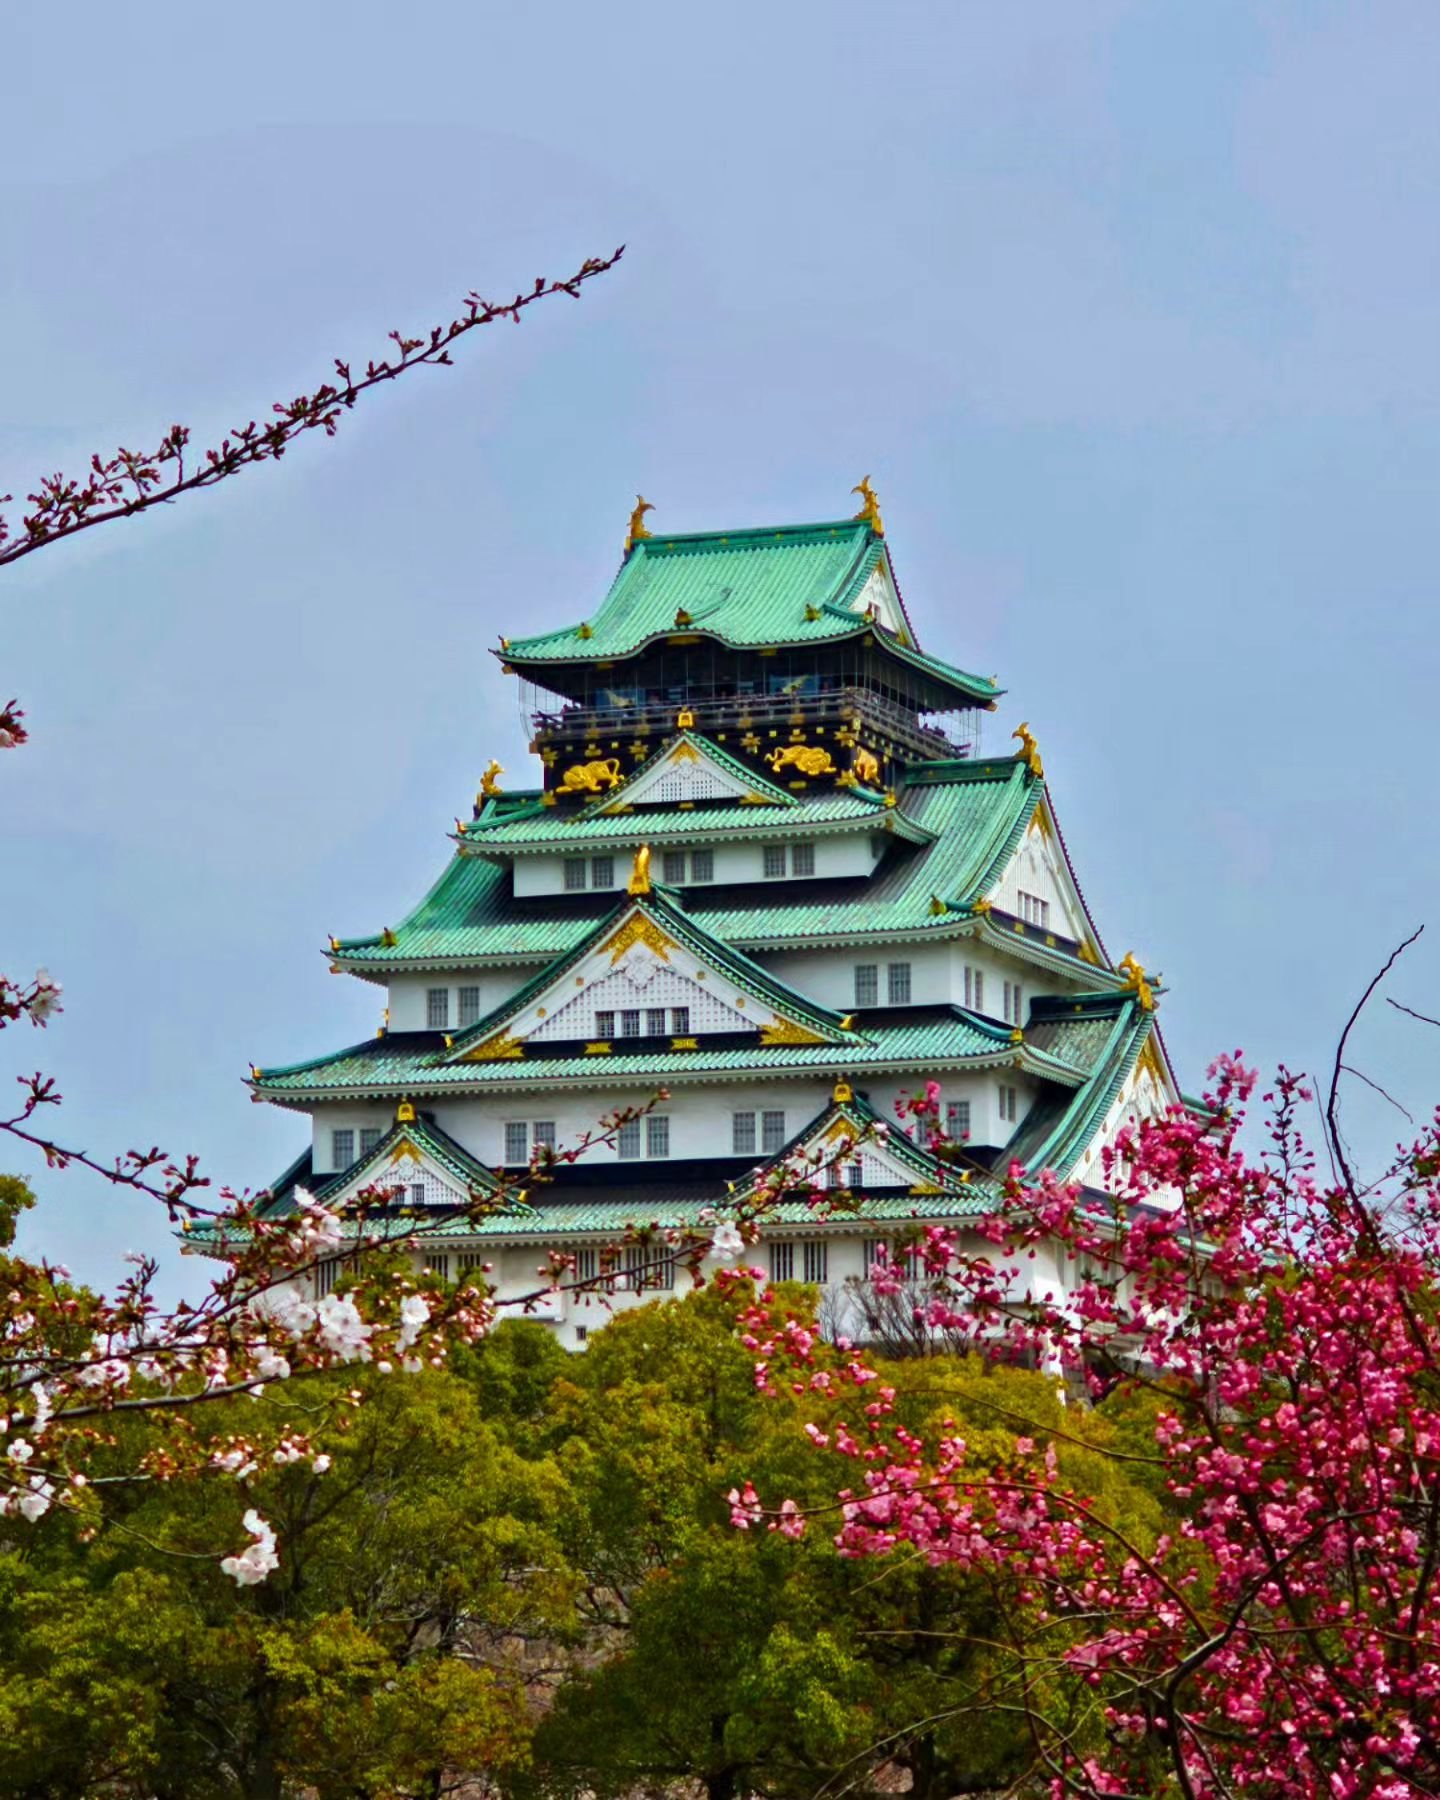 The most famous landmark in Japan - Osaka Castle 🏰🇯🇵
Would you go visit her?! Let me know below ⬇️